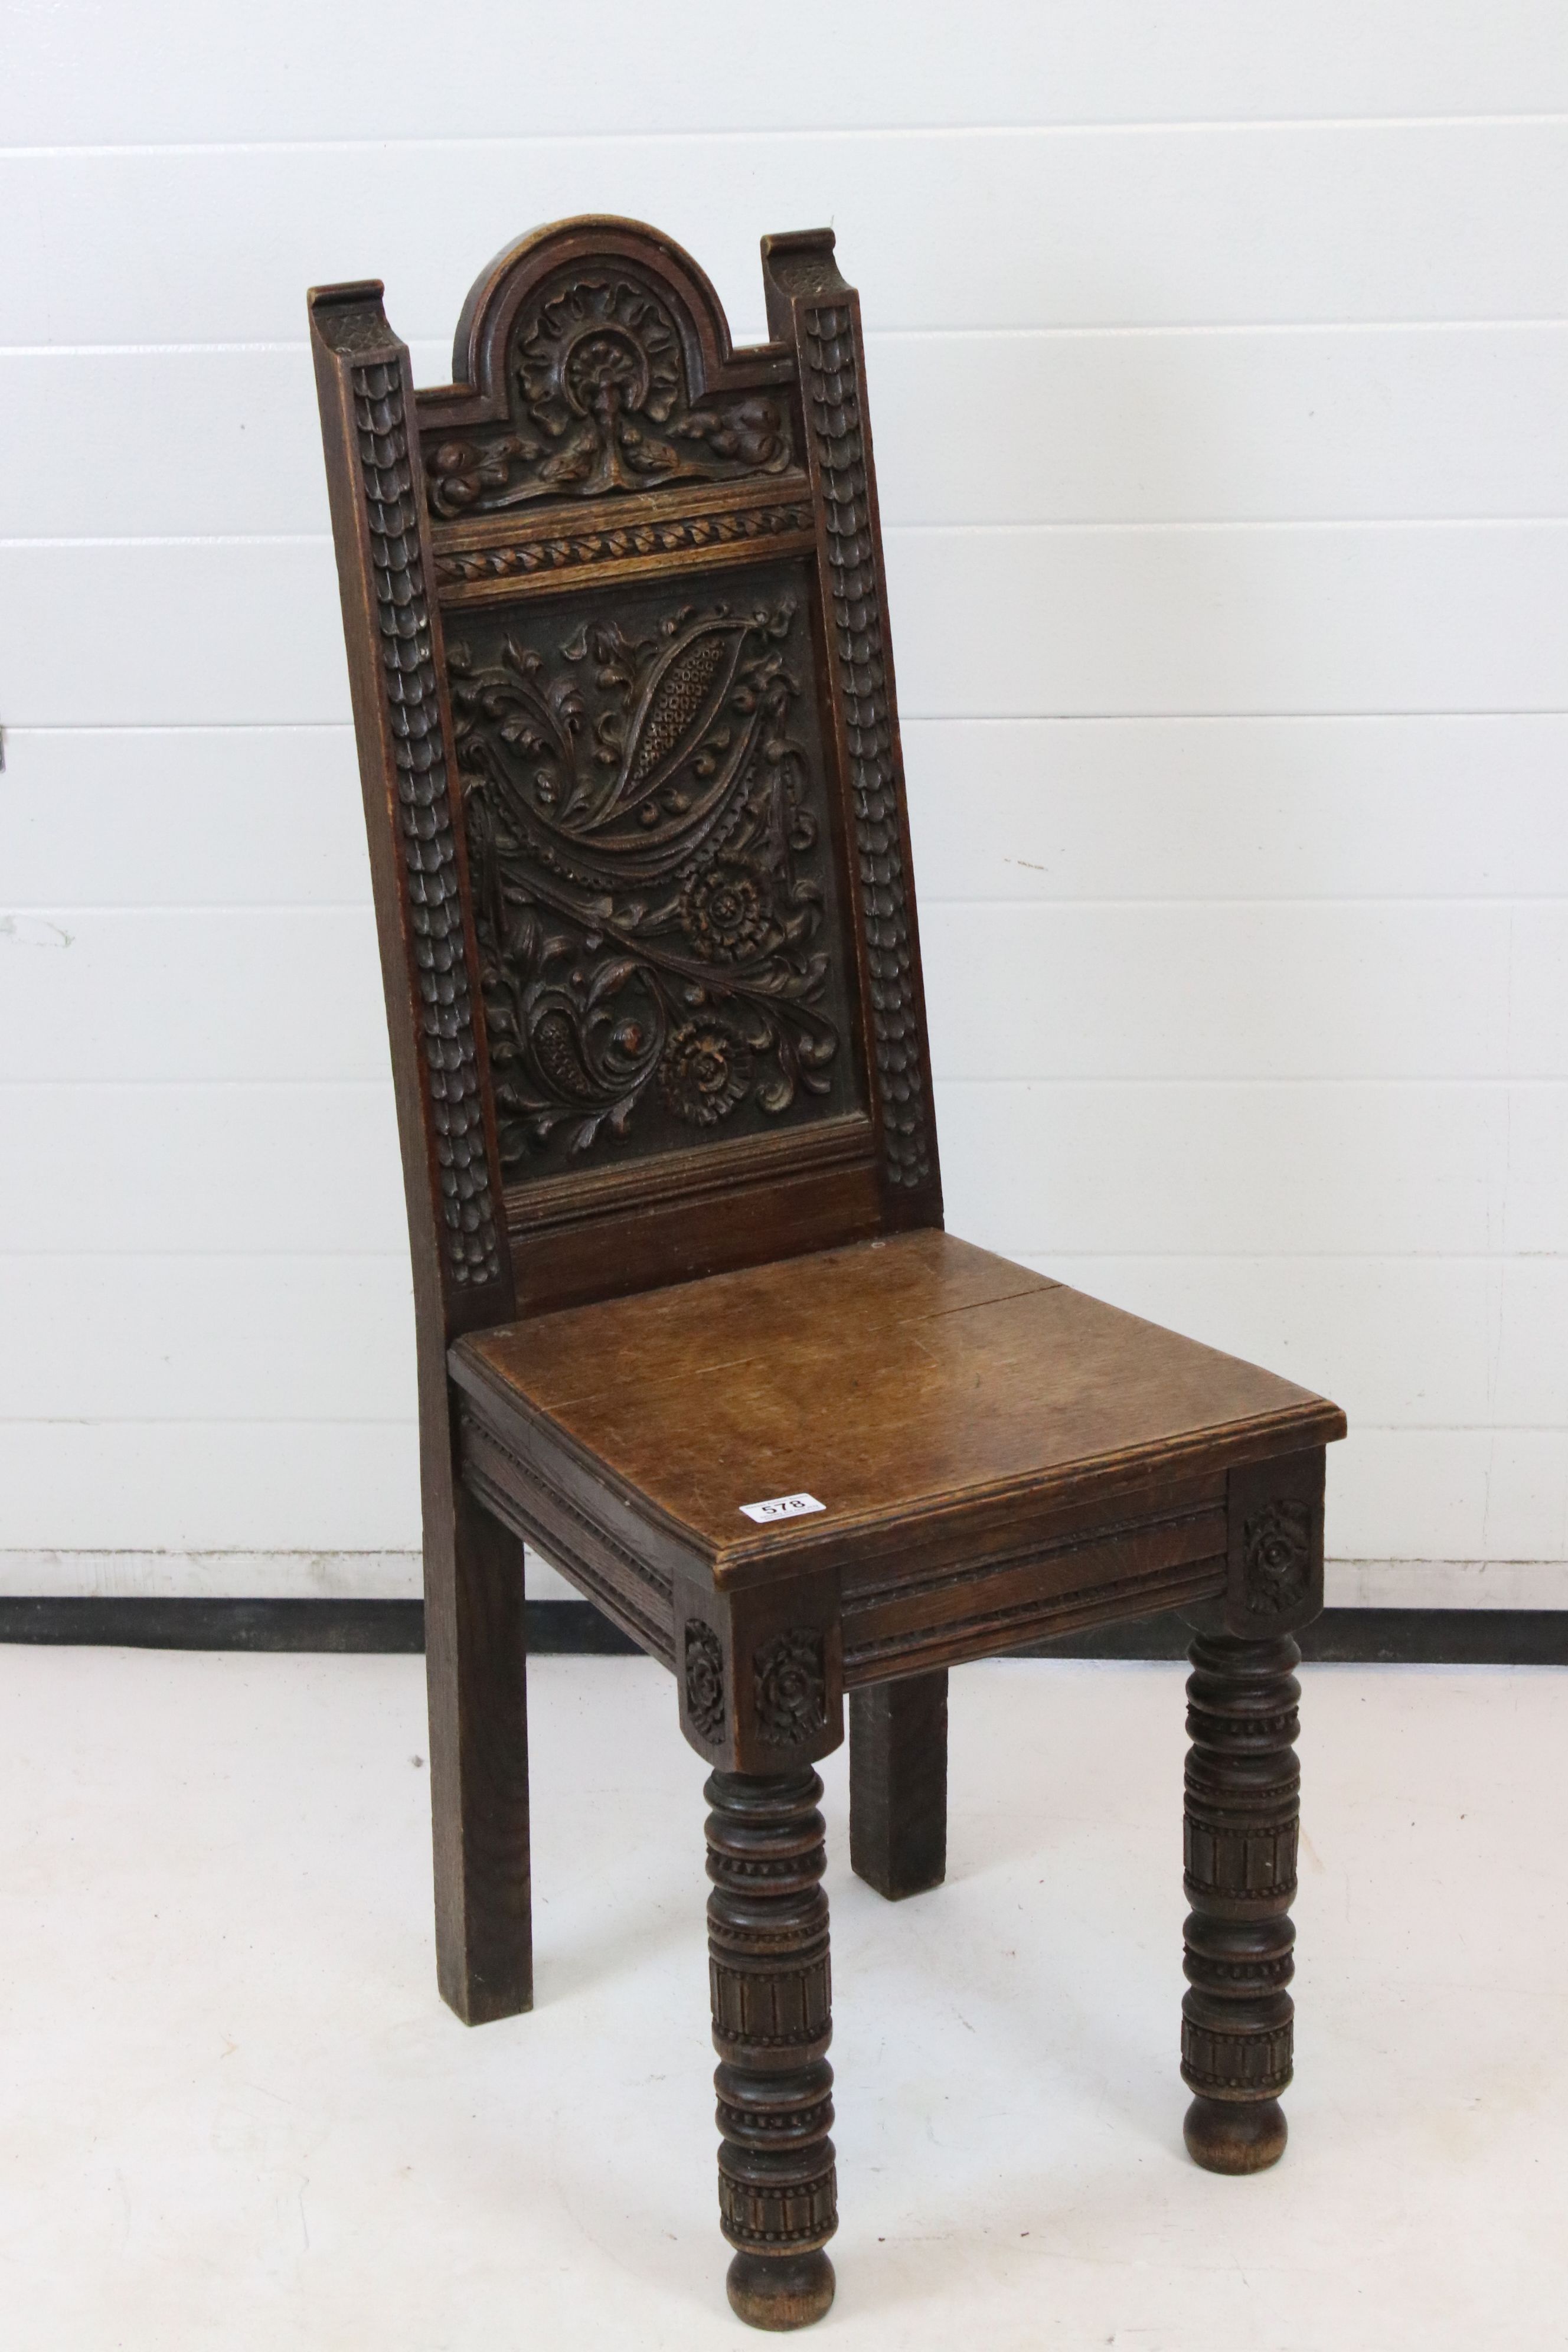 Victorian Jacobean Revival Oak Hall Chair, the arched rectangular back heavily carved with foliage